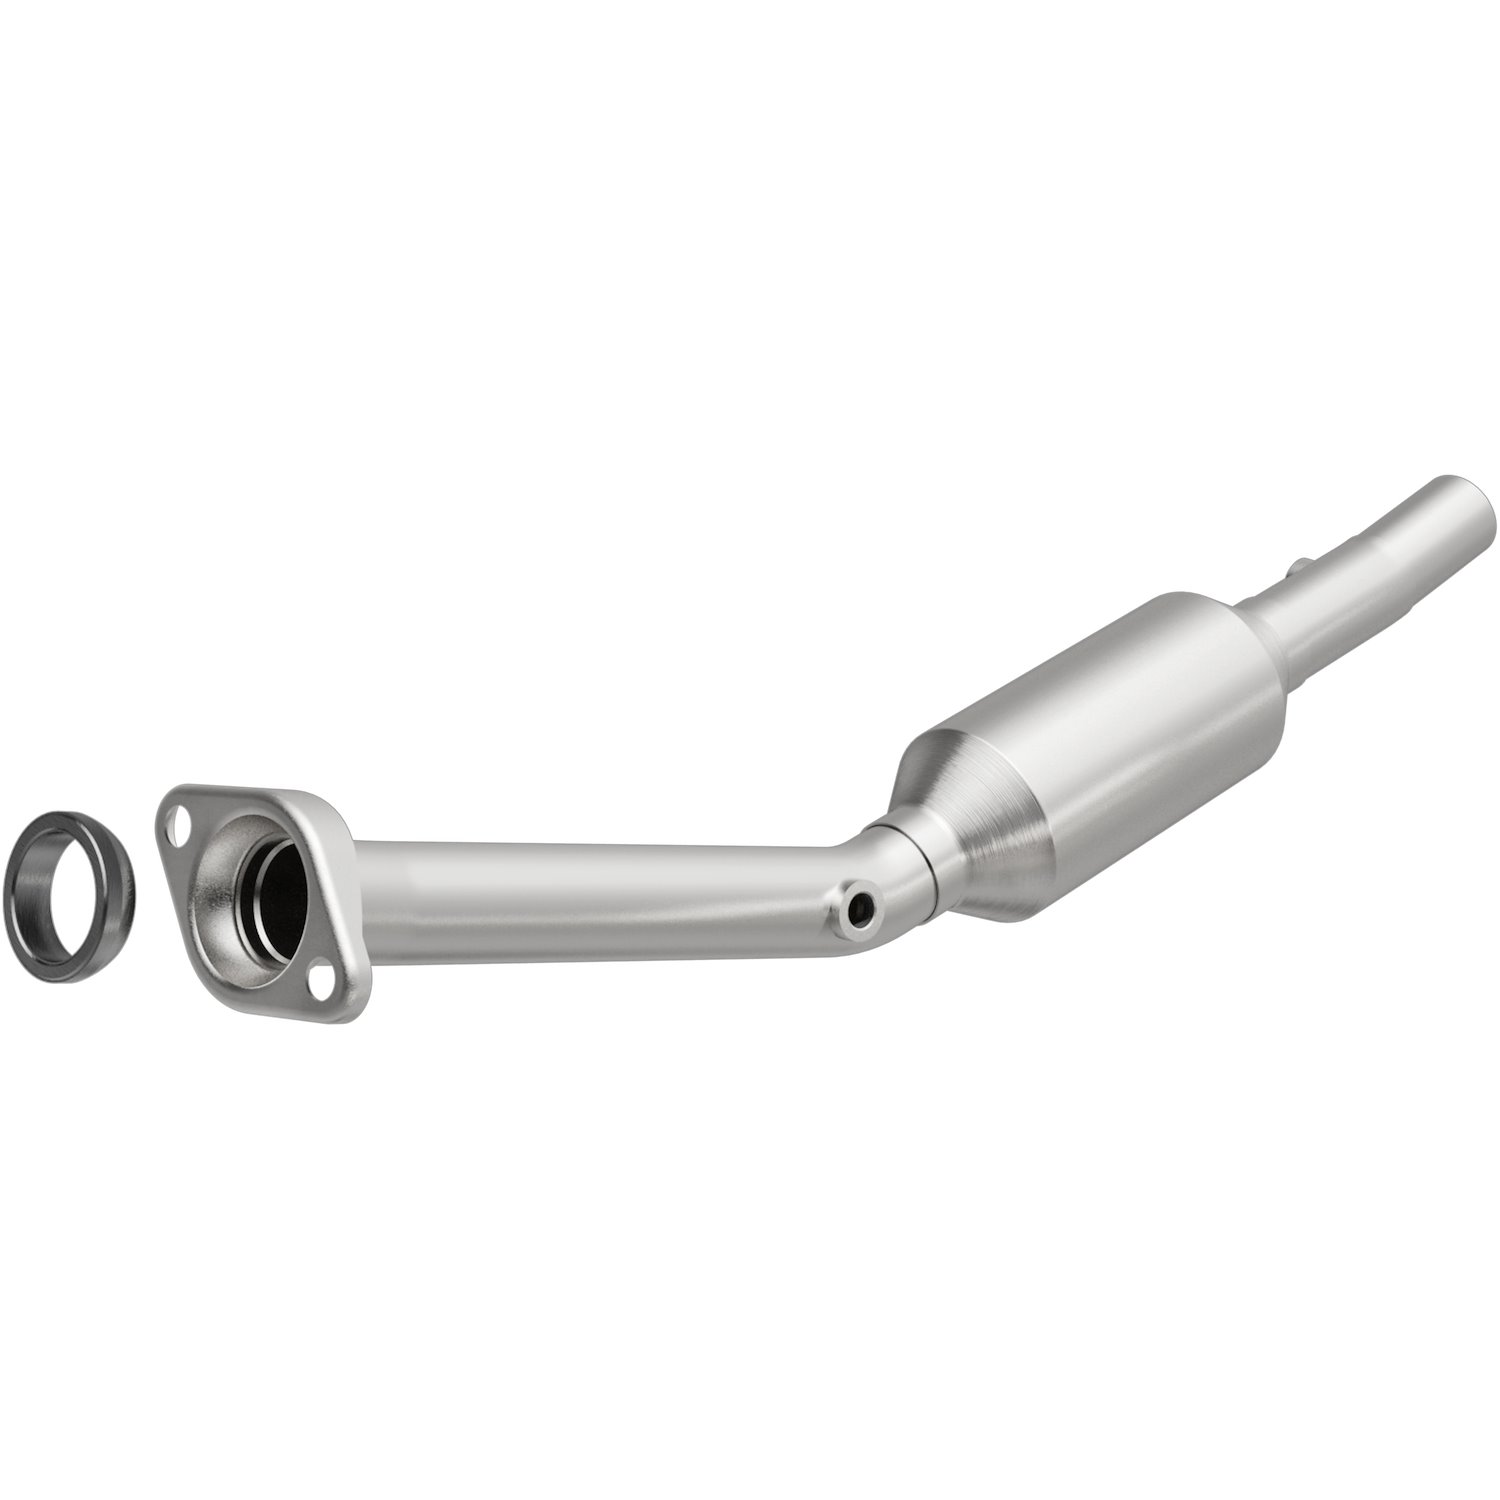 HM Grade Federal / EPA Compliant Direct-Fit Catalytic Converter 93300